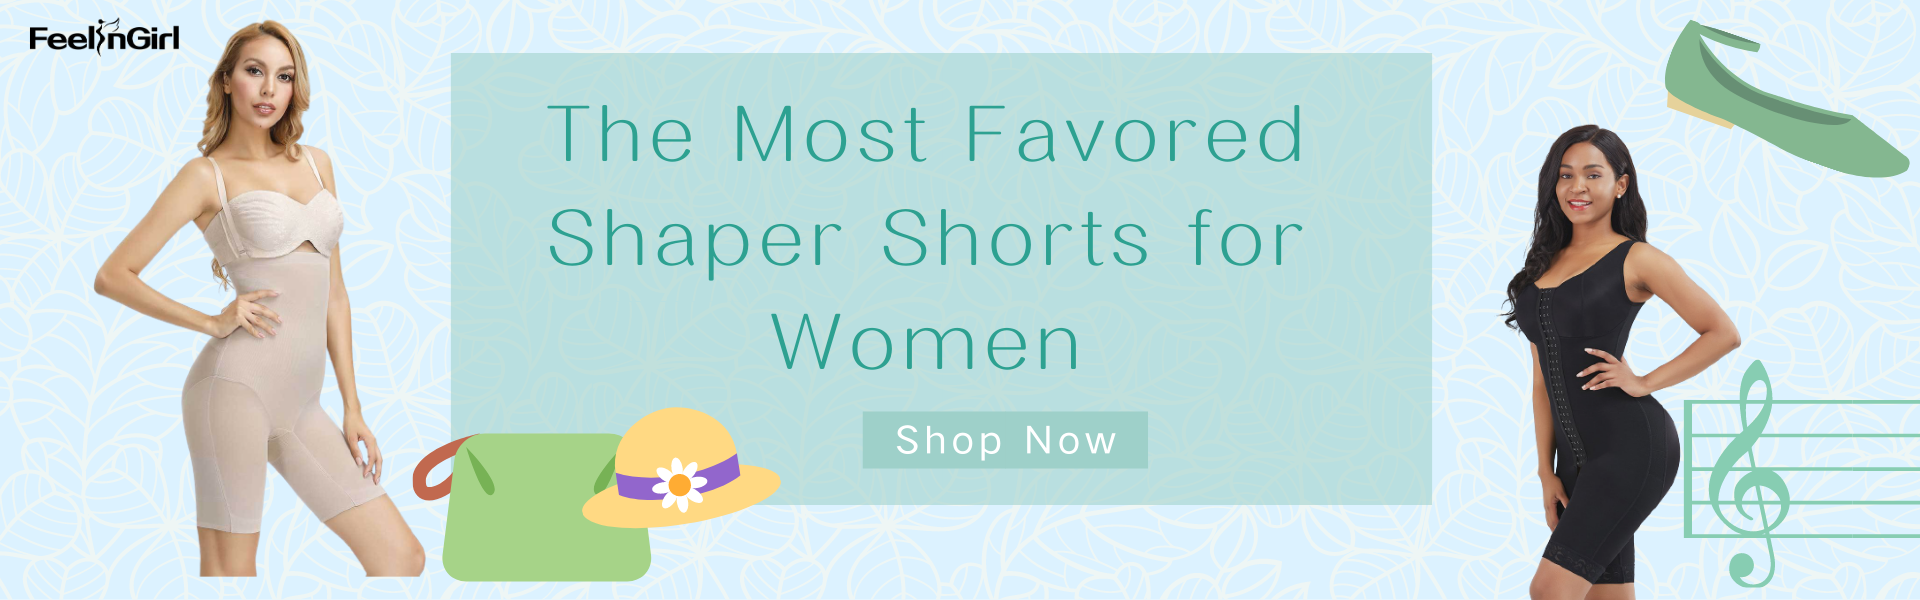 The Most Favored Shaper Shorts for Women